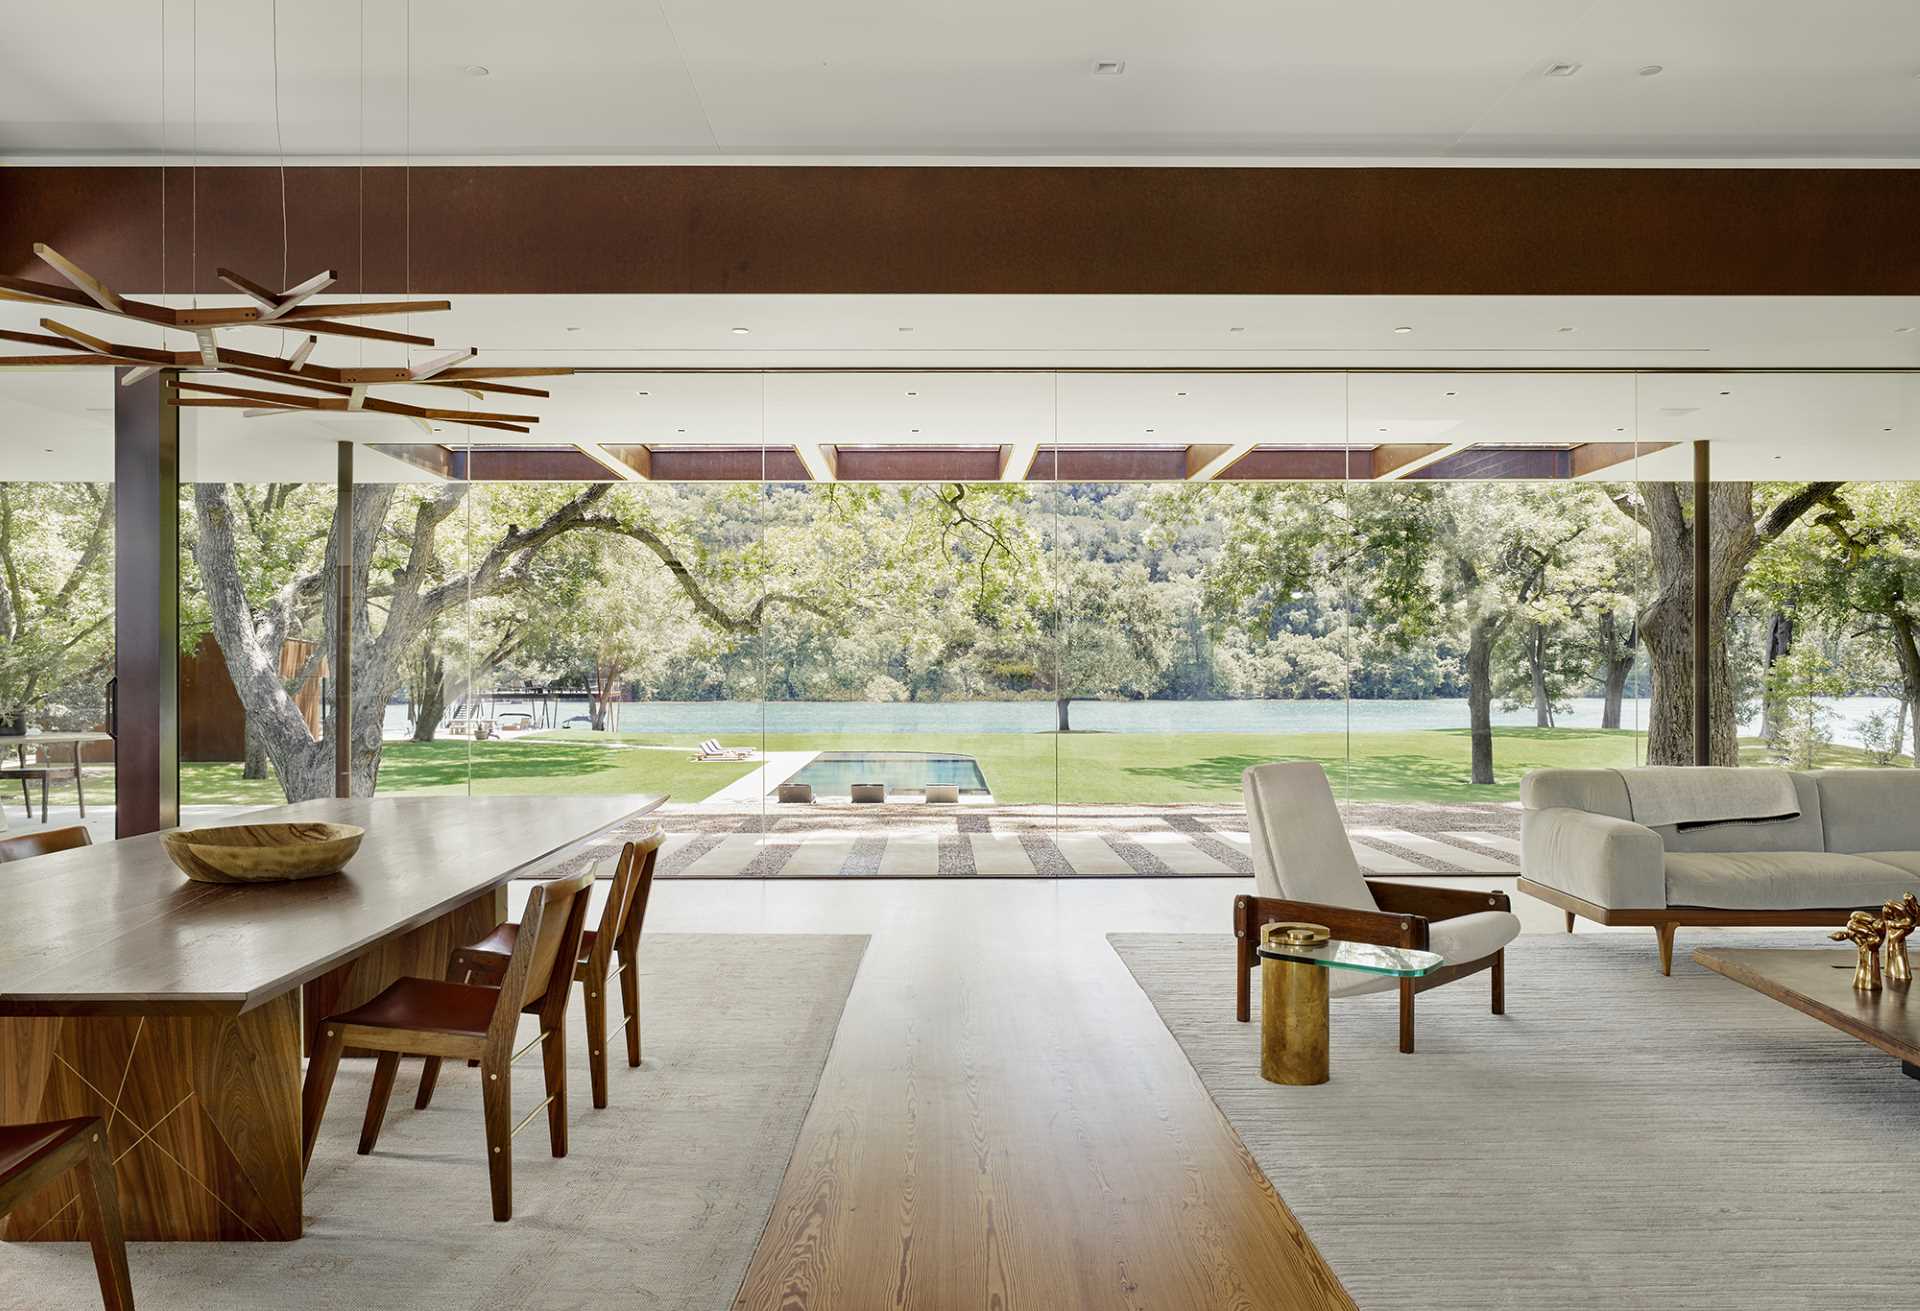 The centerpiece of the residence is the 1,000-square-foot great room that includes two walls of butt-glazed, floor-to-ceiling glass allowing views from and through the main living spaces to the landscape, while deep overhangs protect the interiors from the harsh summer sun.